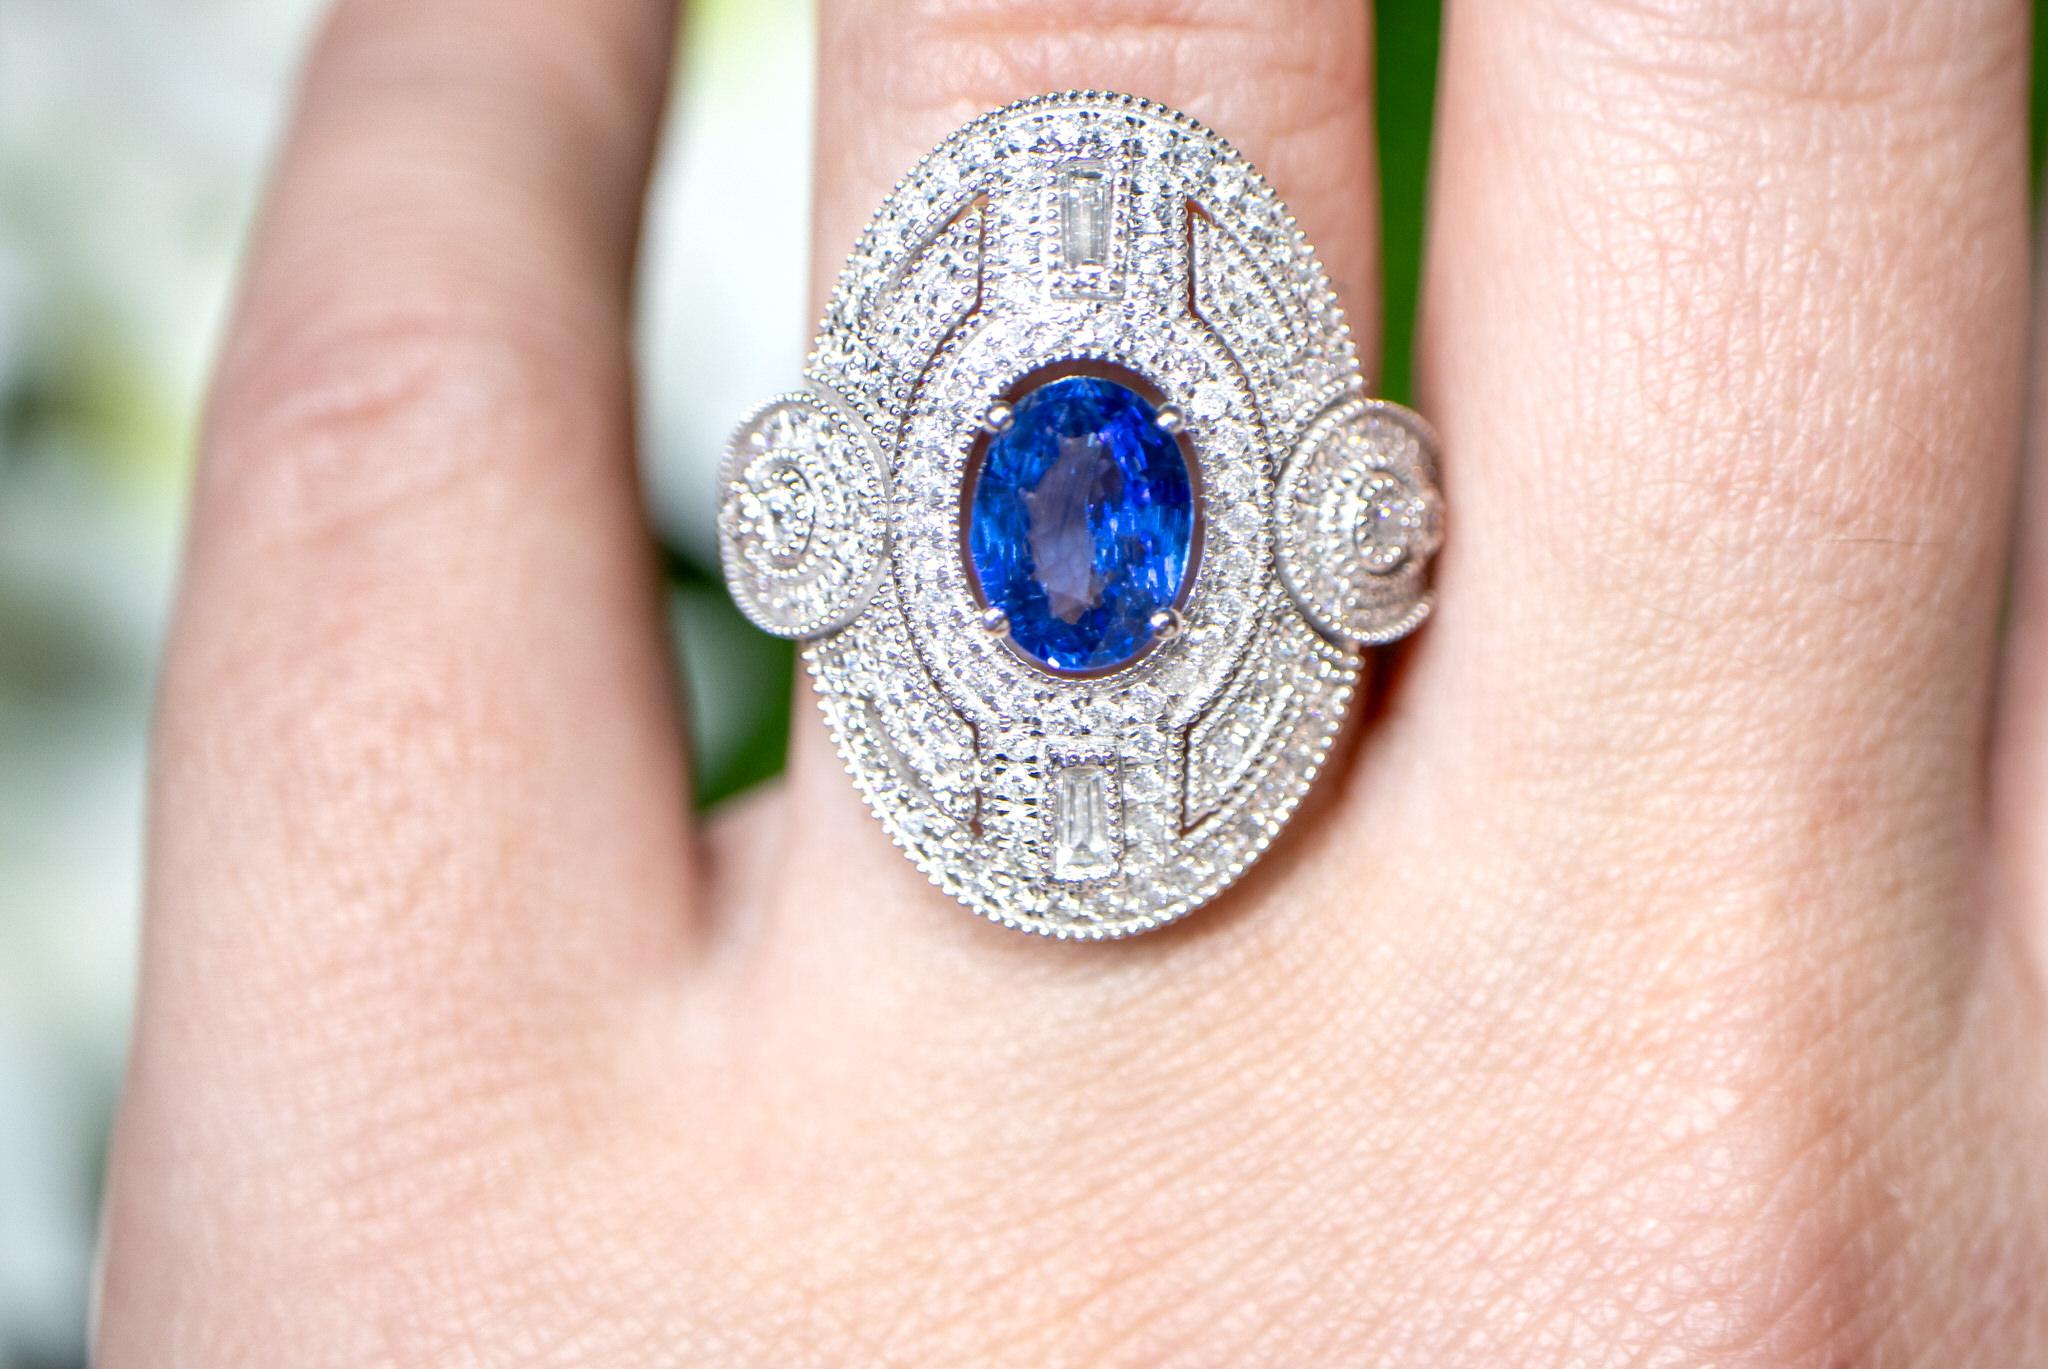 It comes with the Gemological Appraisal by GIA GG/AJP
All Gemstones are Natural
Blue Sapphire = 1.37 Carat
Diamonds = 0.81 Carats
Metal: 18K White Gold
Ring Size: 6.25* US
*It can be resized complimentary